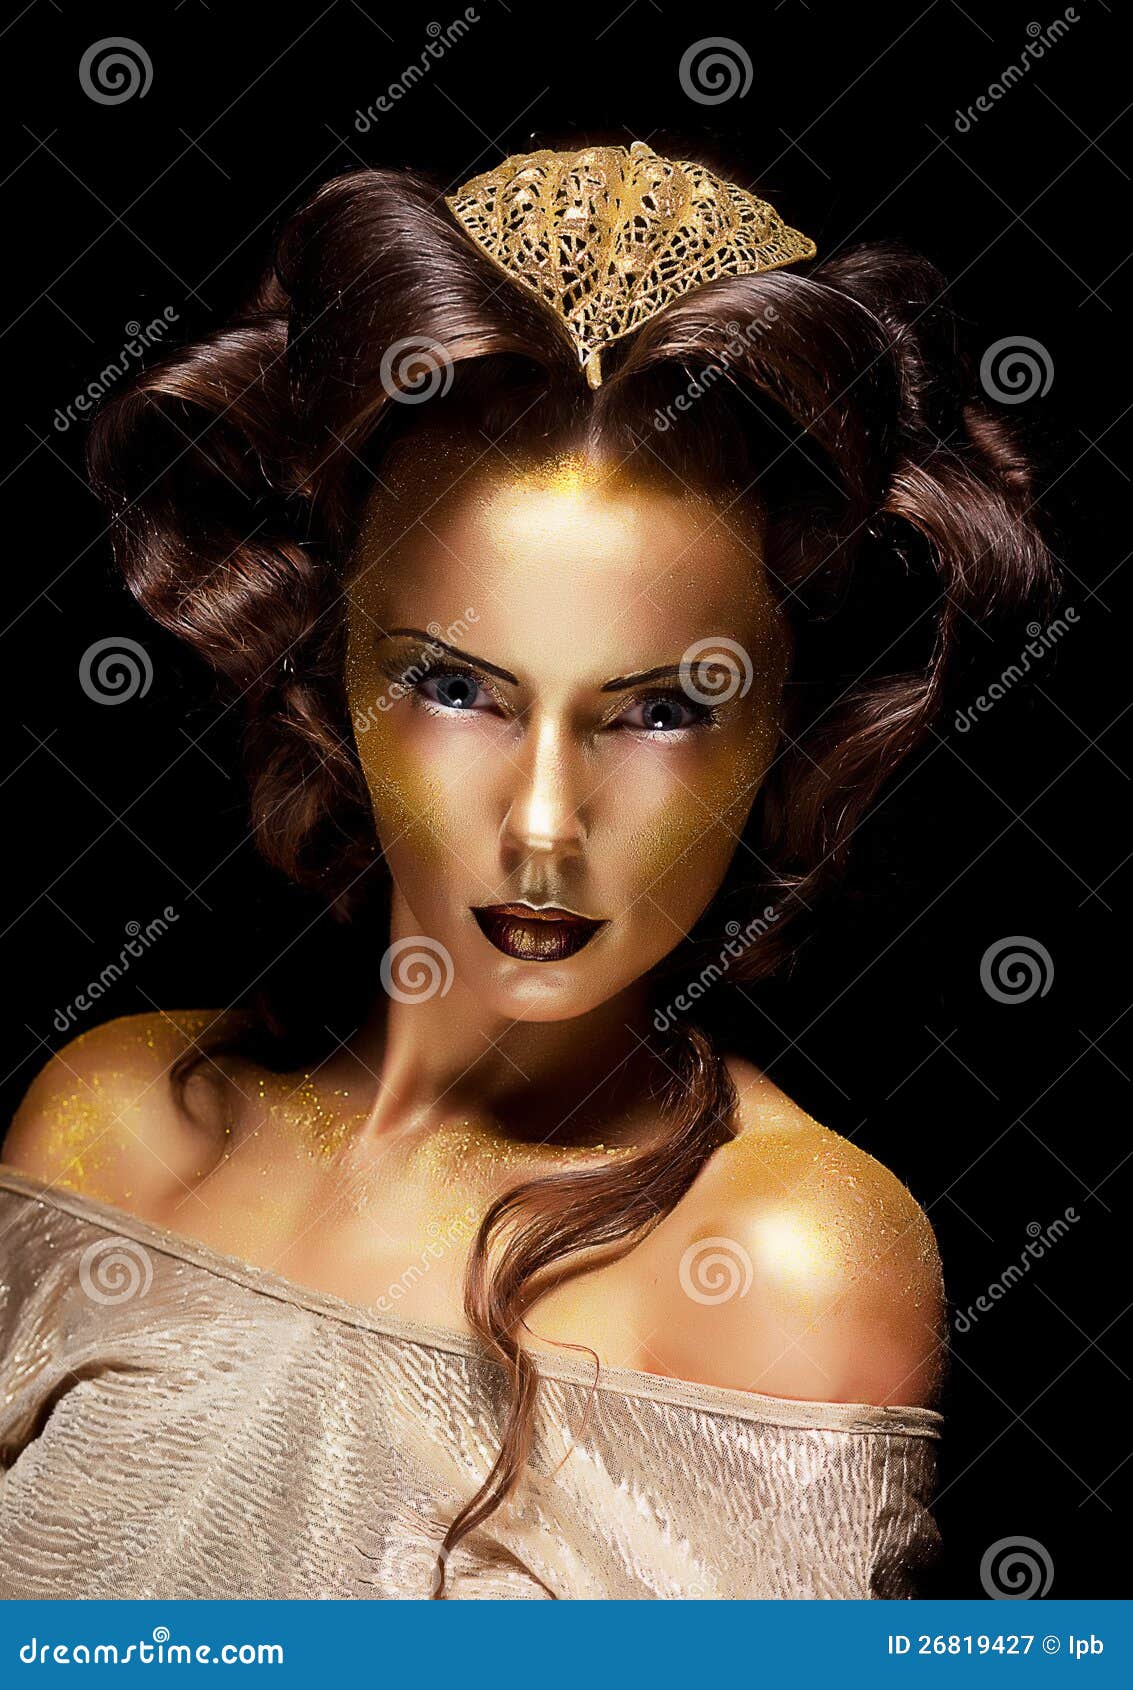 woman gilded golden face - theater luxury make up